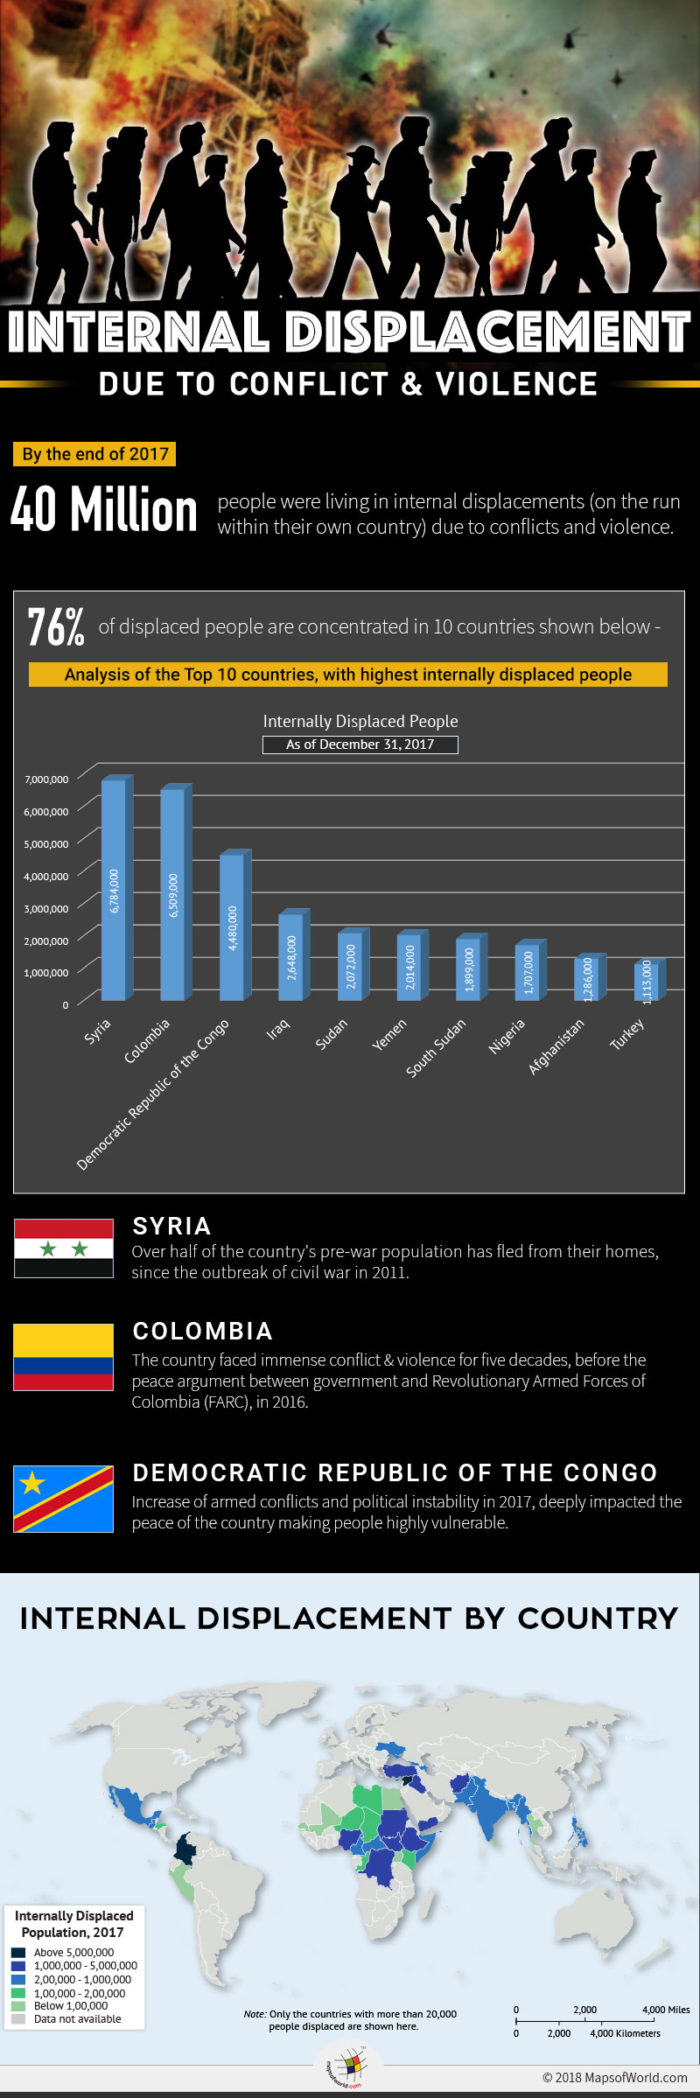 Infographic highlighting the issue of Internal Displacement in countries